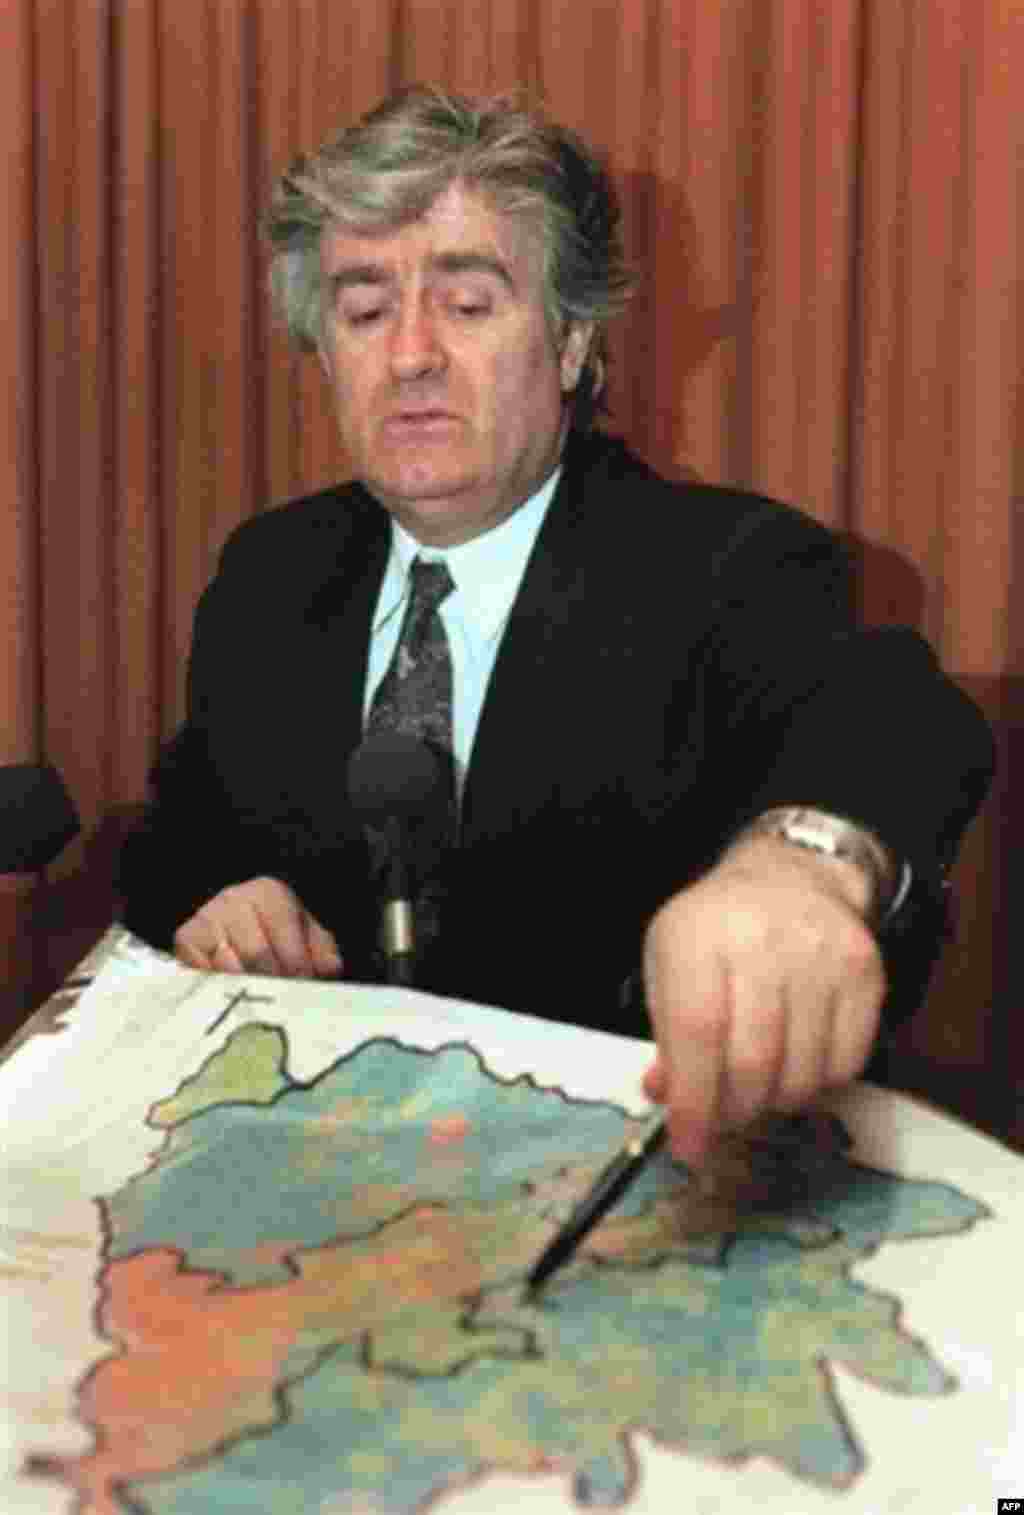 Karadzic displays a map of Bosnia's ethnic makeup at his headquarters in Pale in 1993 - During Bosnia's 1992-95 war, Karadzic sought to radicalize ethnic groups while leading Bosnian Serb forces against Bosnian Muslims and Croats who declared independence from Yugoslavia. He received support from the Yugoslav National Army under the control of Slobodan Milosevic. In 1991, Karadzic told Bosnia-Herzegovina's parliament that "Muslims will disappear from the Earth." 